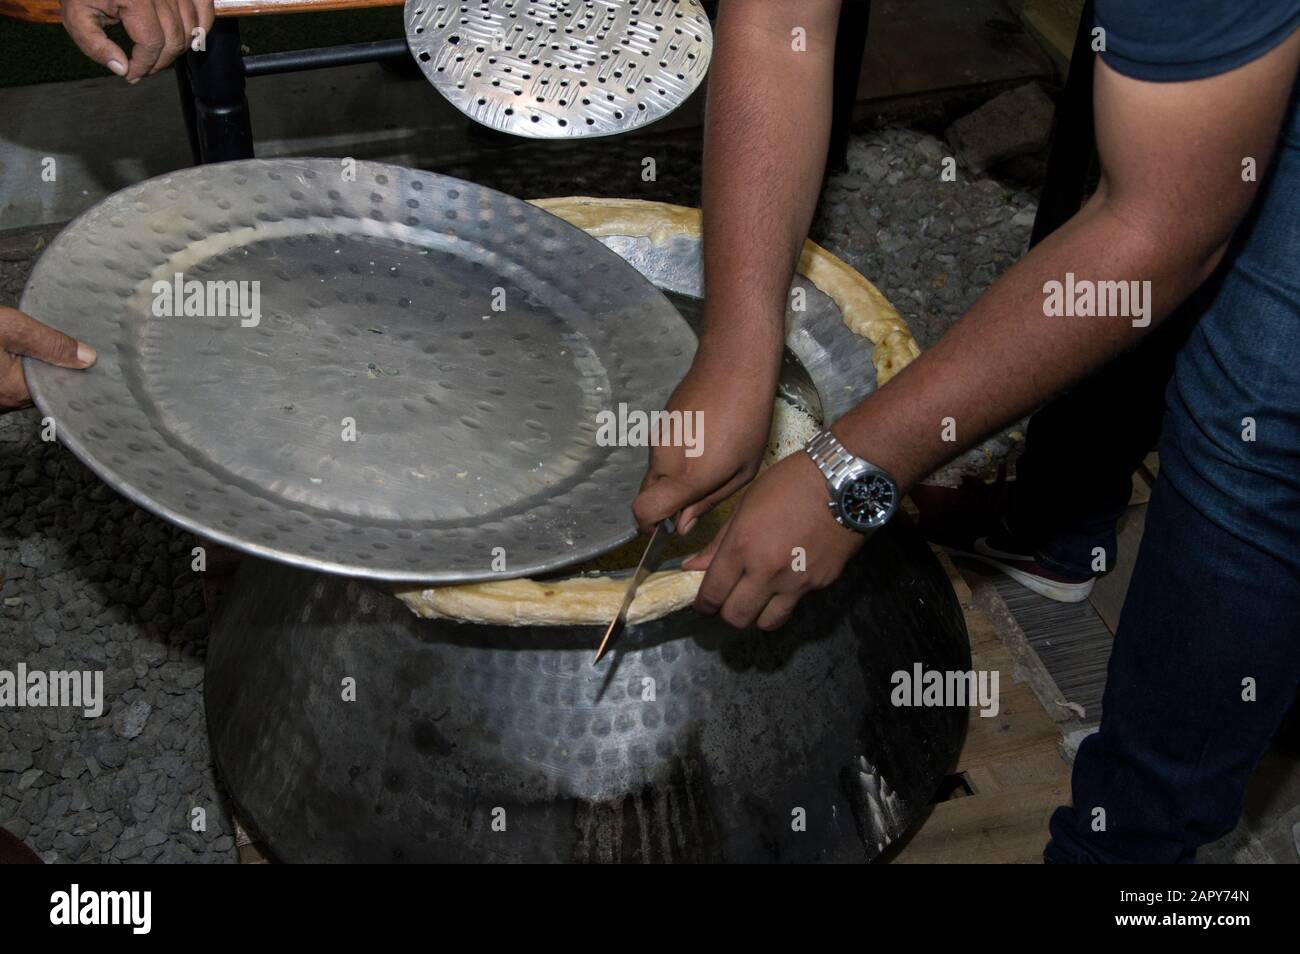 https://c8.alamy.com/comp/2APY74N/chefs-hands-cut-bread-around-an-aluminum-biriyani-pot-traditionally-used-for-cooking-rice-this-dish-is-particularly-prevalent-in-hyderabad-india-2APY74N.jpg